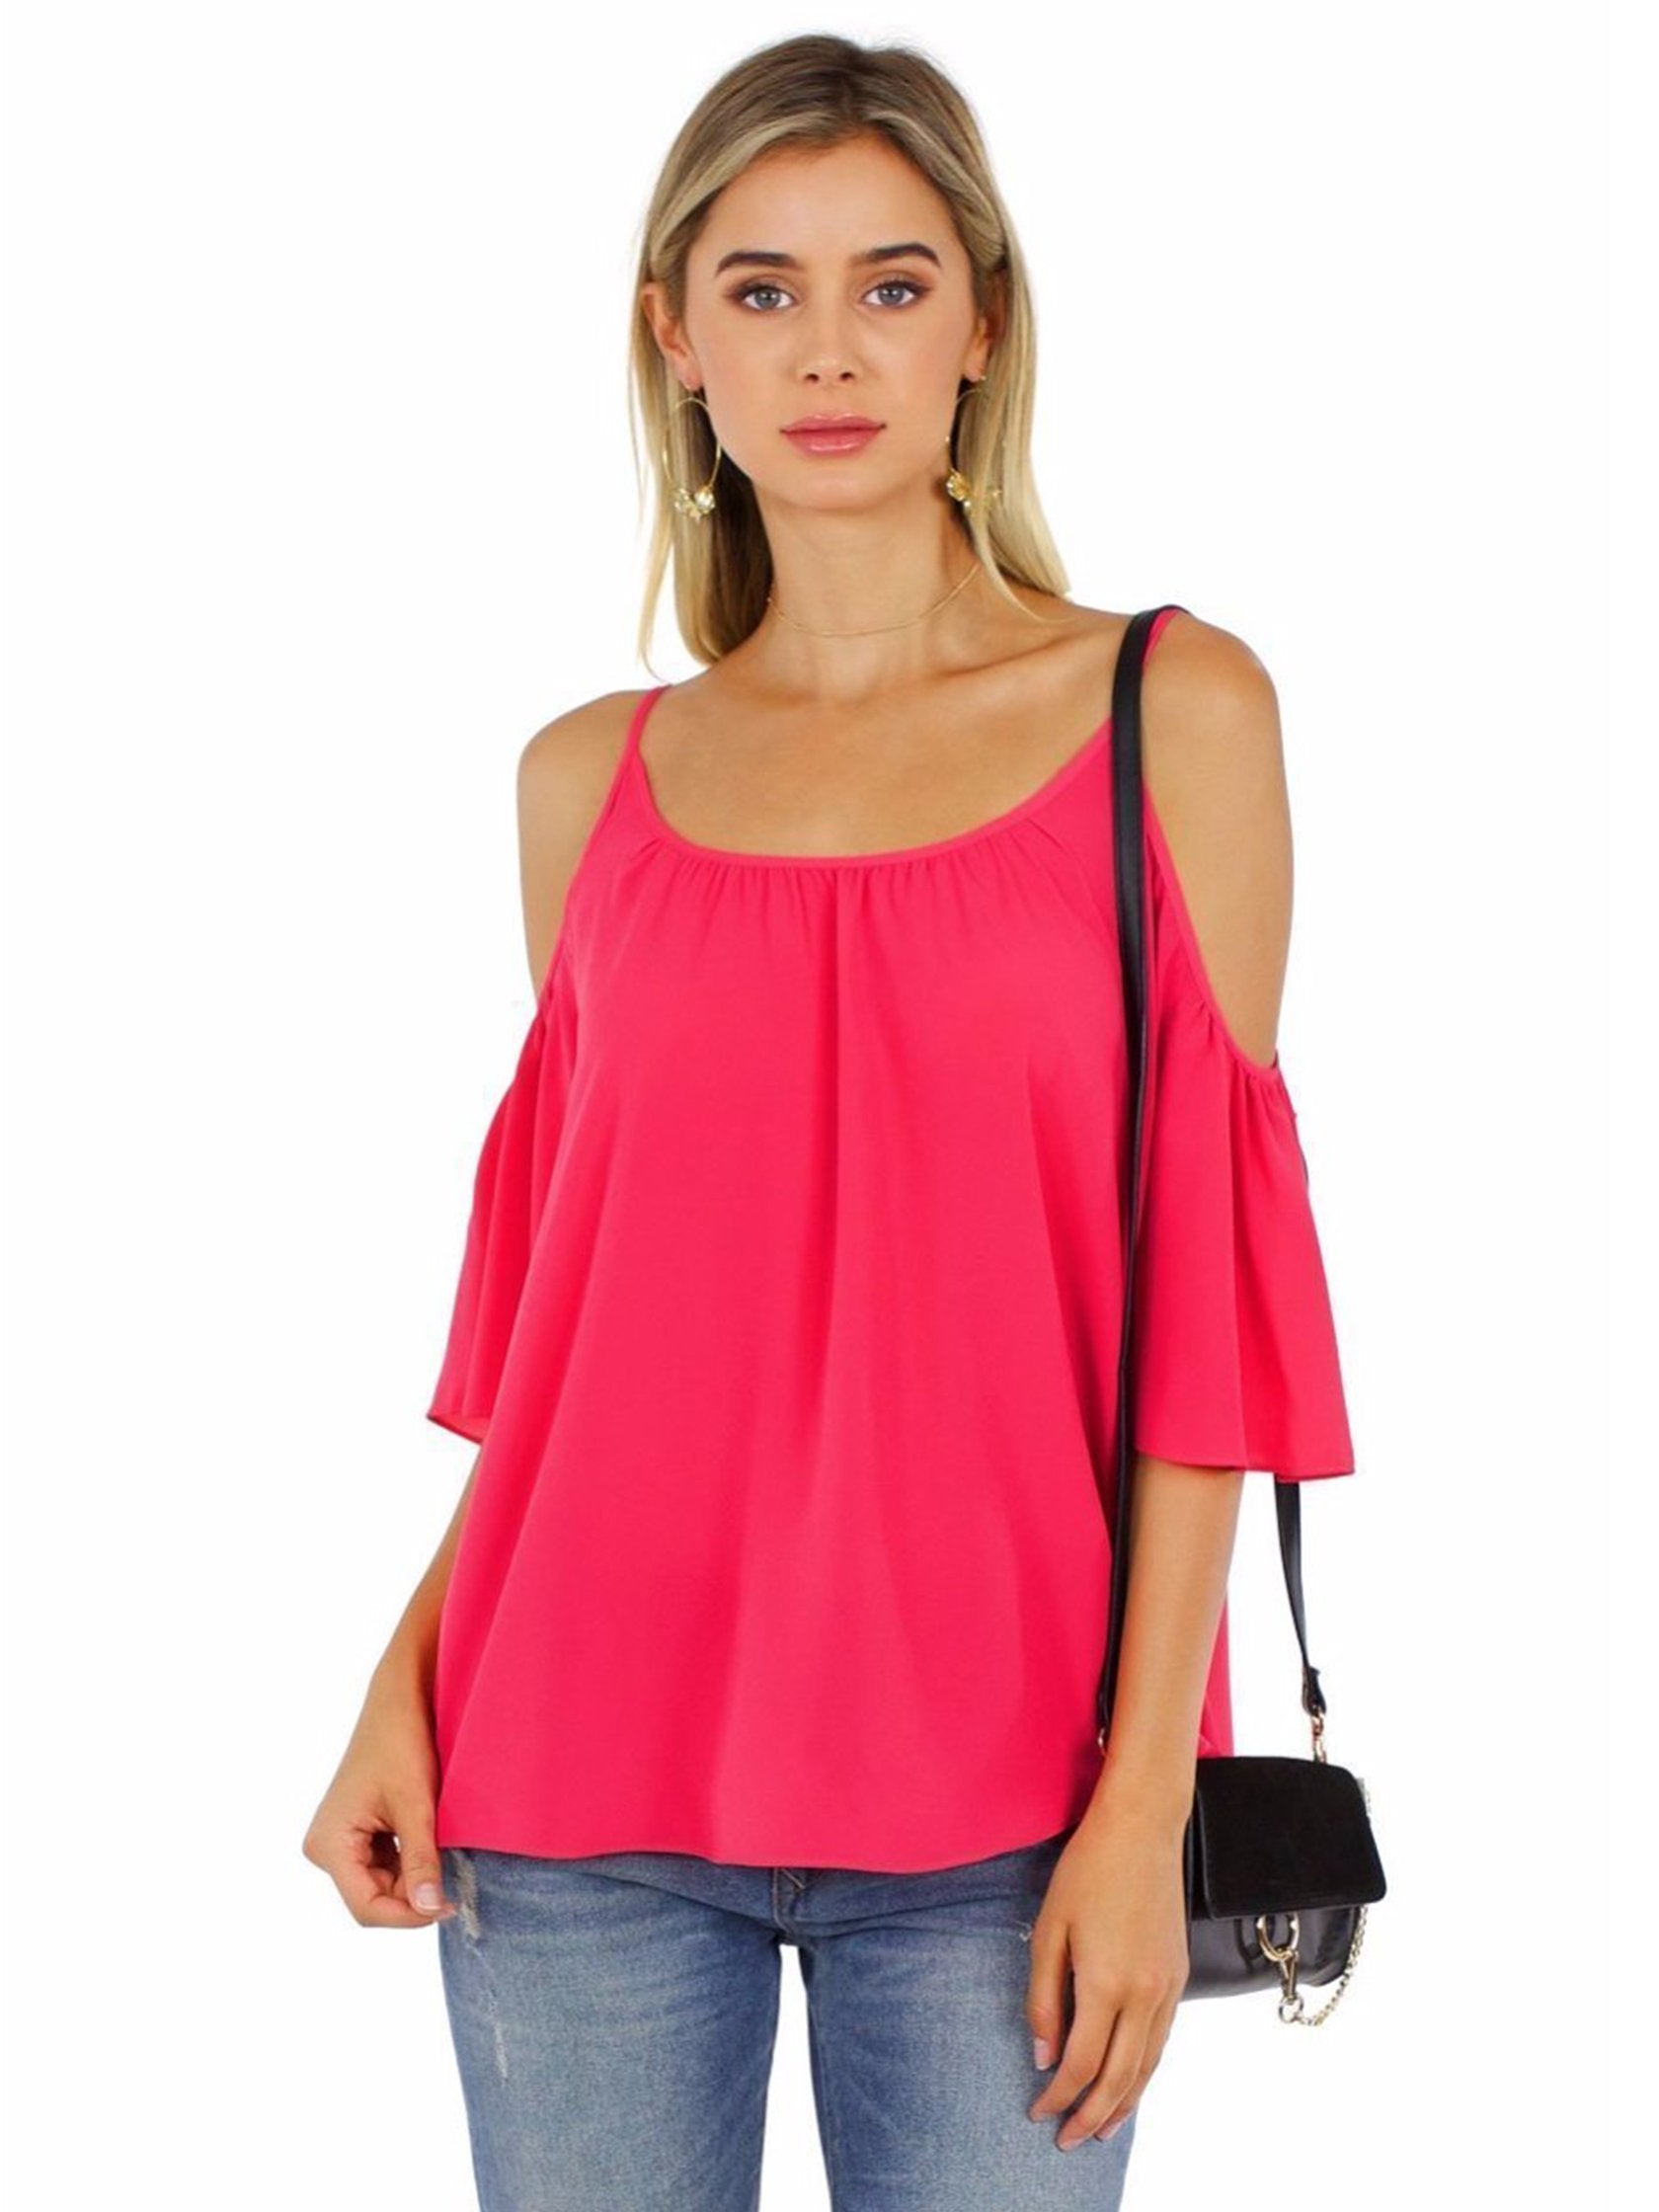 Girl outfit in a top rental from French Connection called Crepe Light Cut Out Shoulder Top